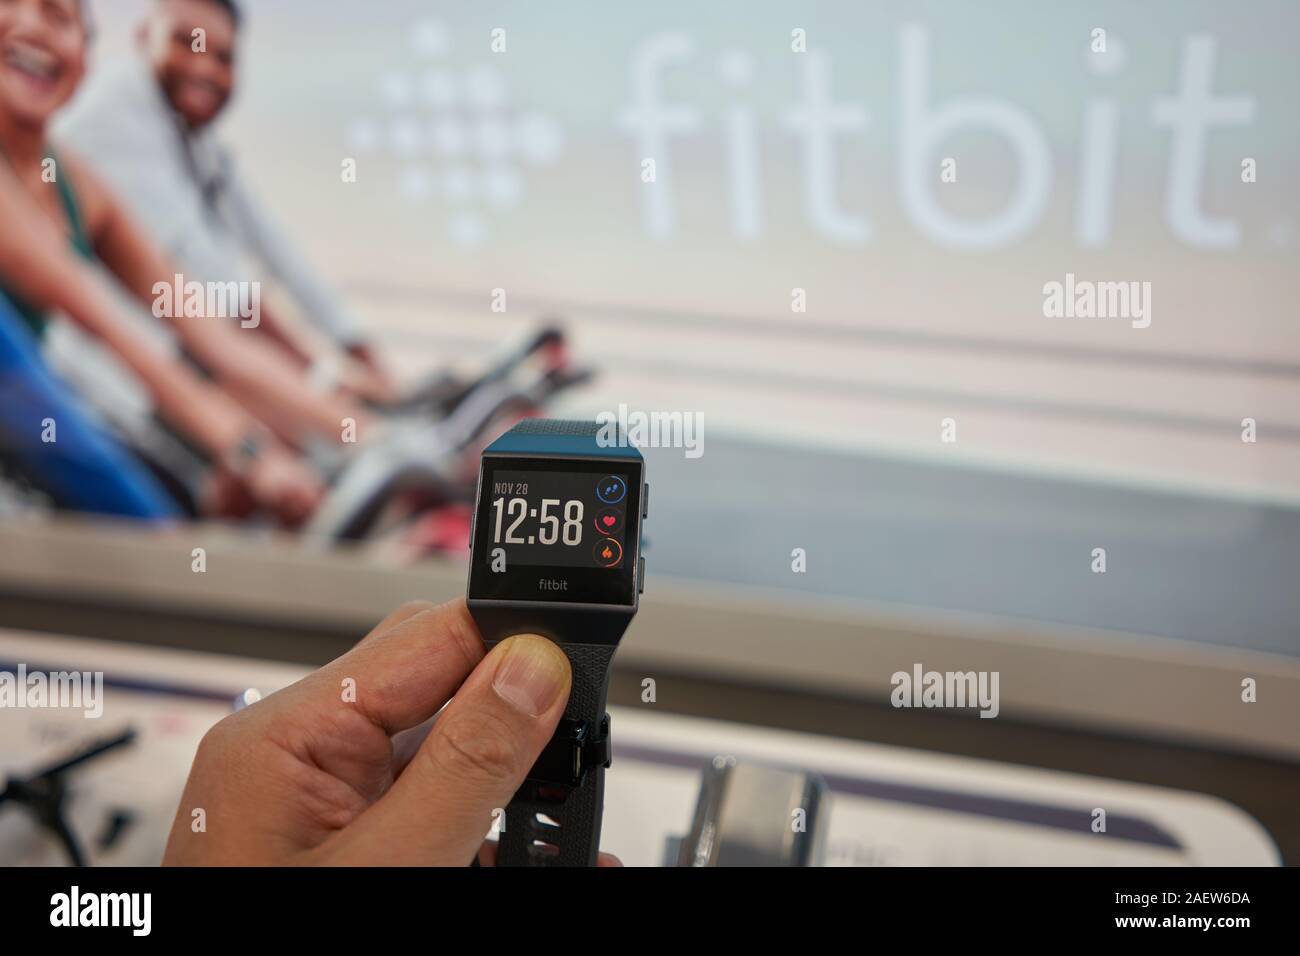 Vancouver, BC, Canada - Oct 12, 2019: A shopper takes a closer look at a Fitbit Ionic Smartwatch in a Best Buy store in Vancouver. Stock Photo